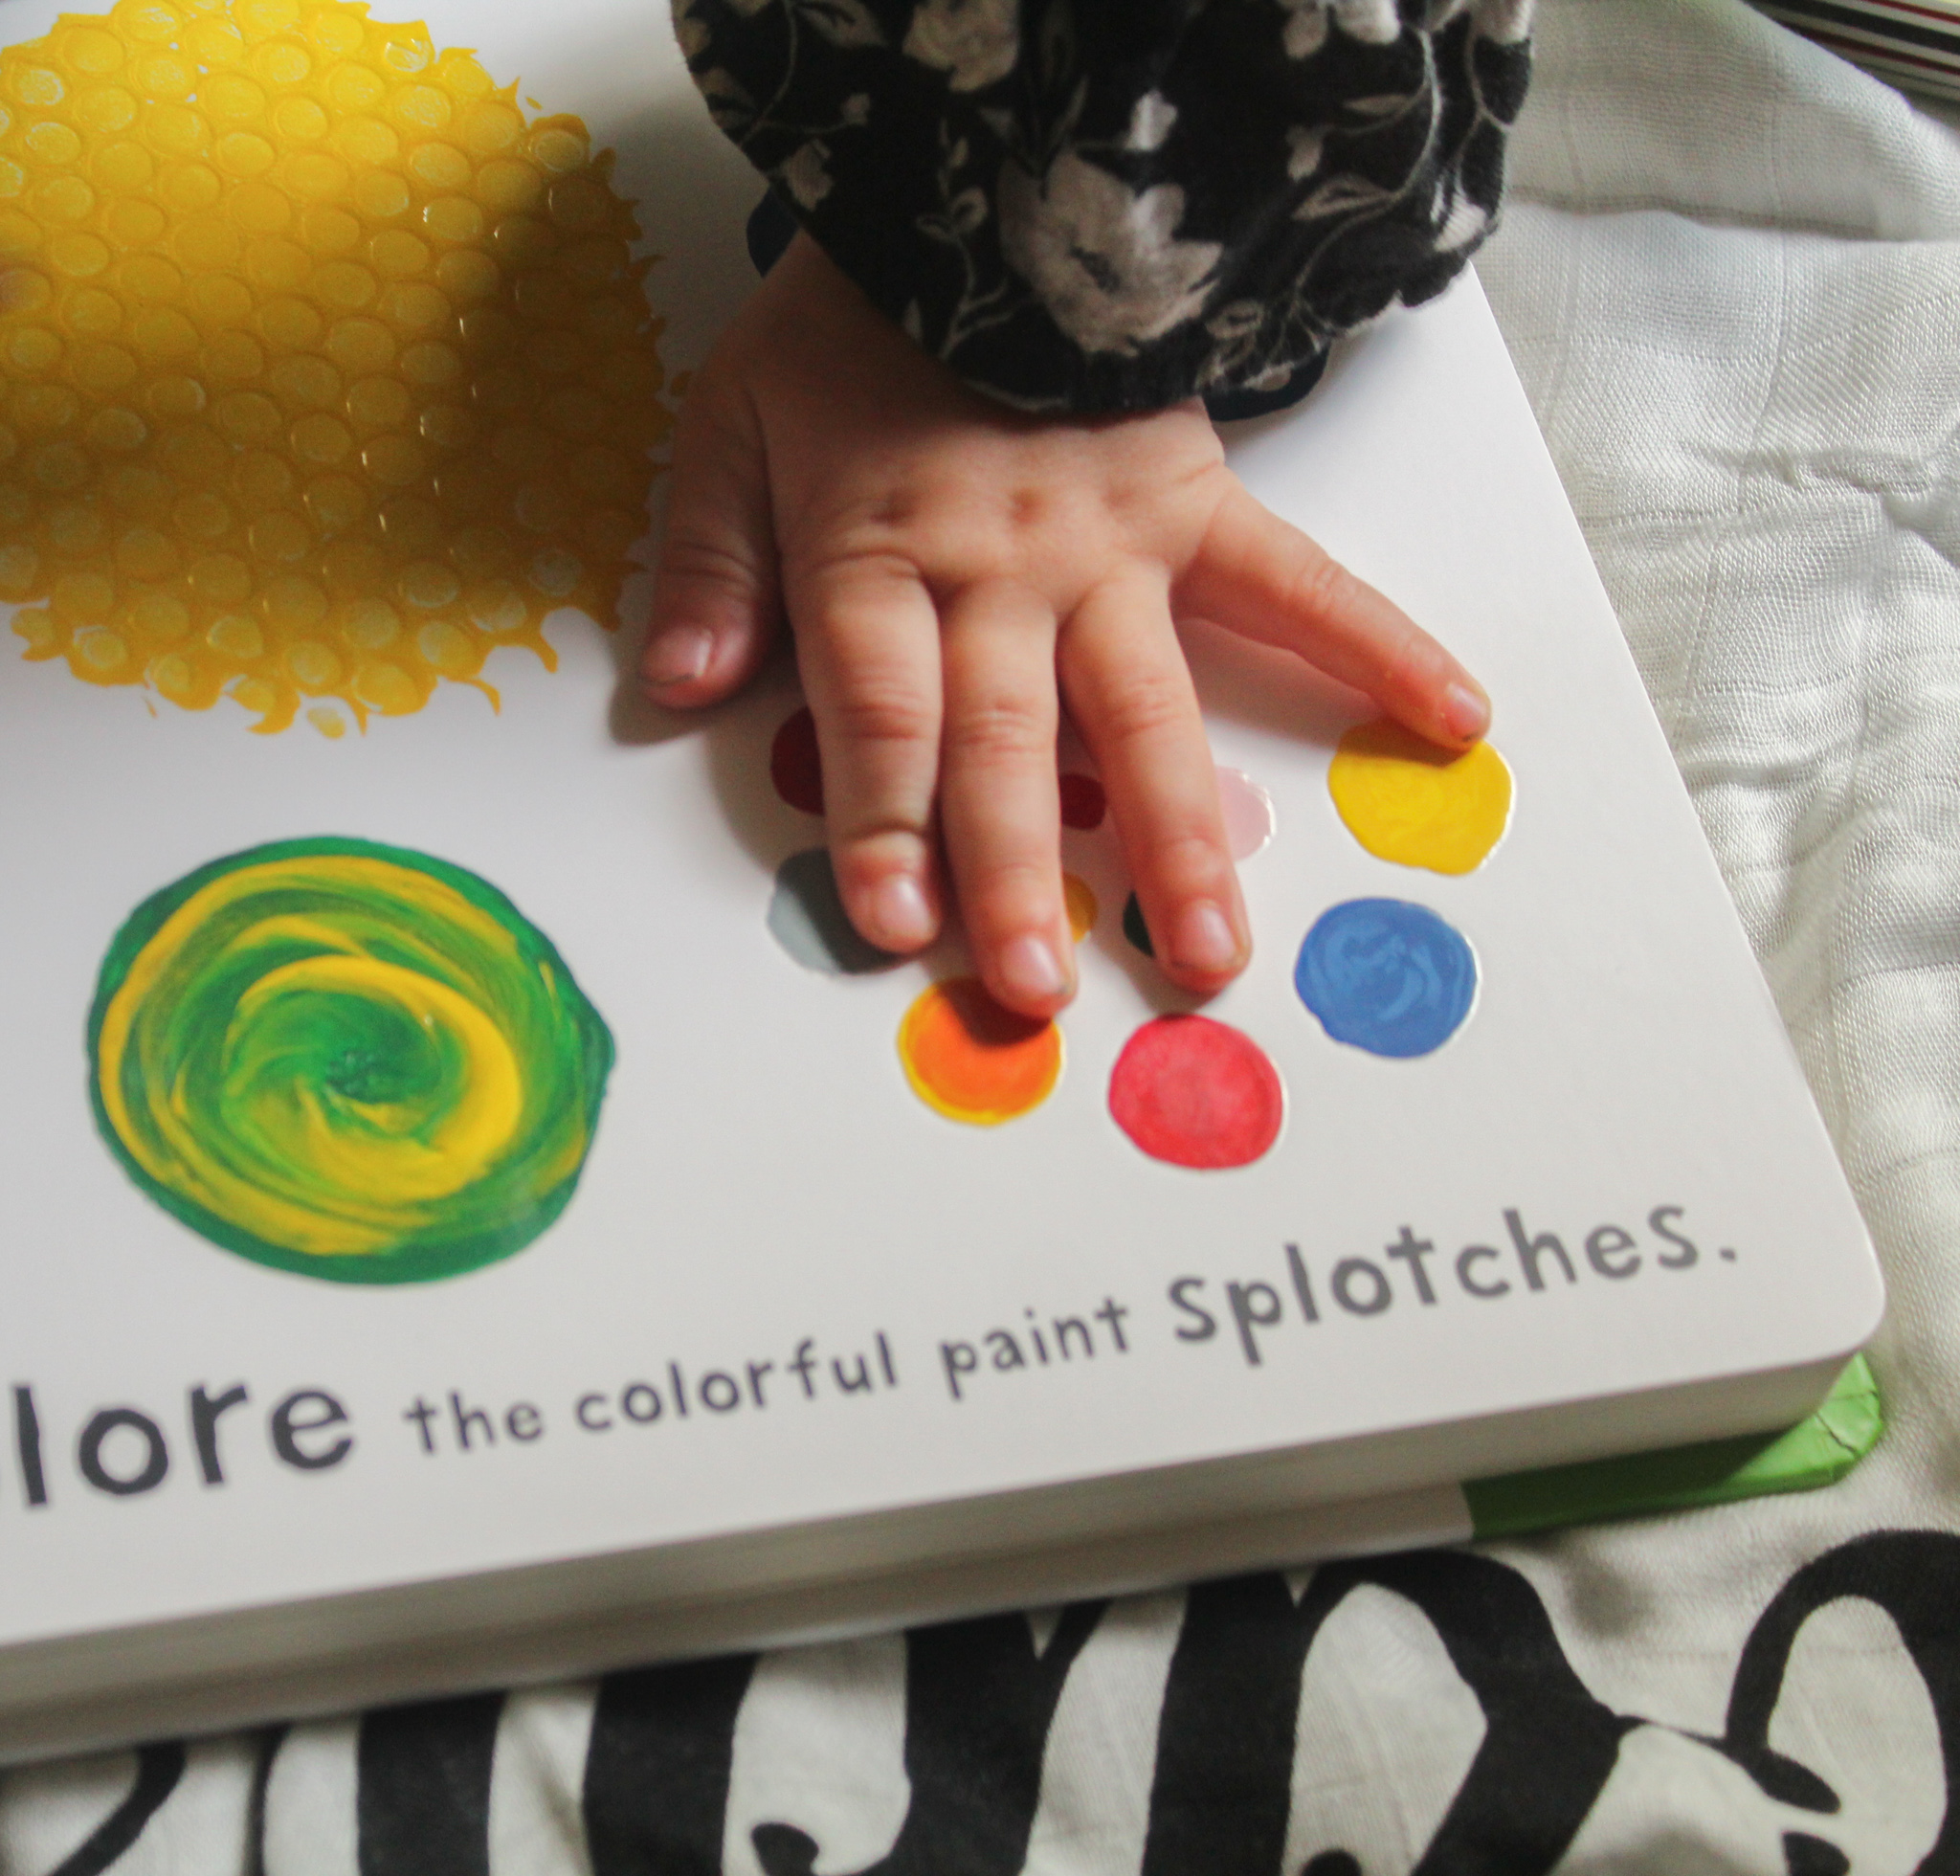 Homeschooling with a toddler? Tricky, but doable! Here are my best tips for keeping a toddler entertained while teaching older kids.